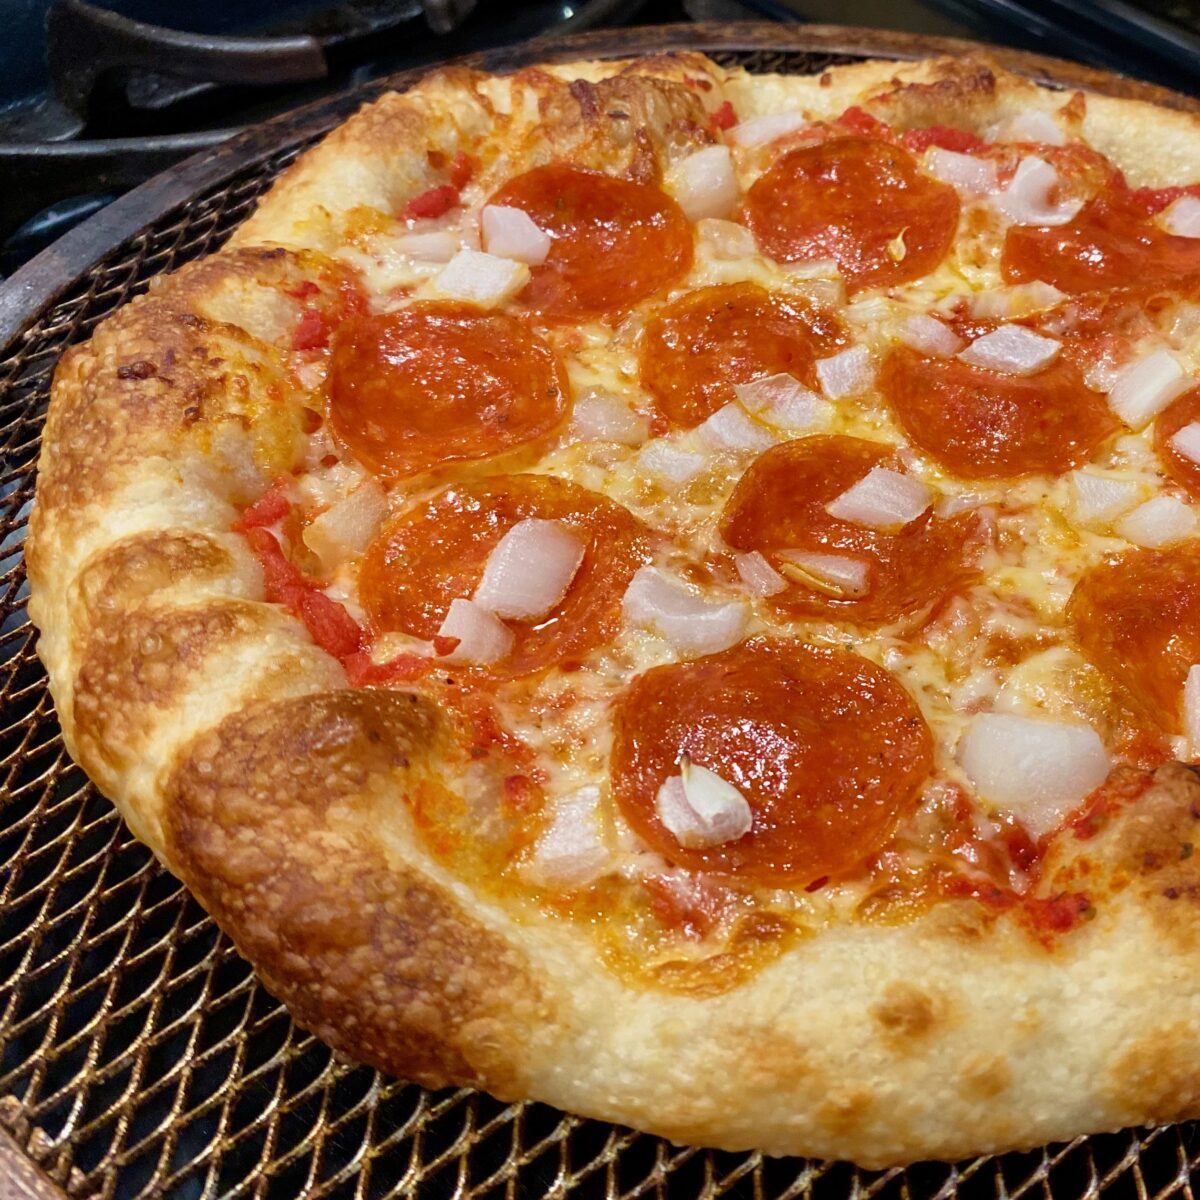 Close up view of pepperoni and onion pizza.